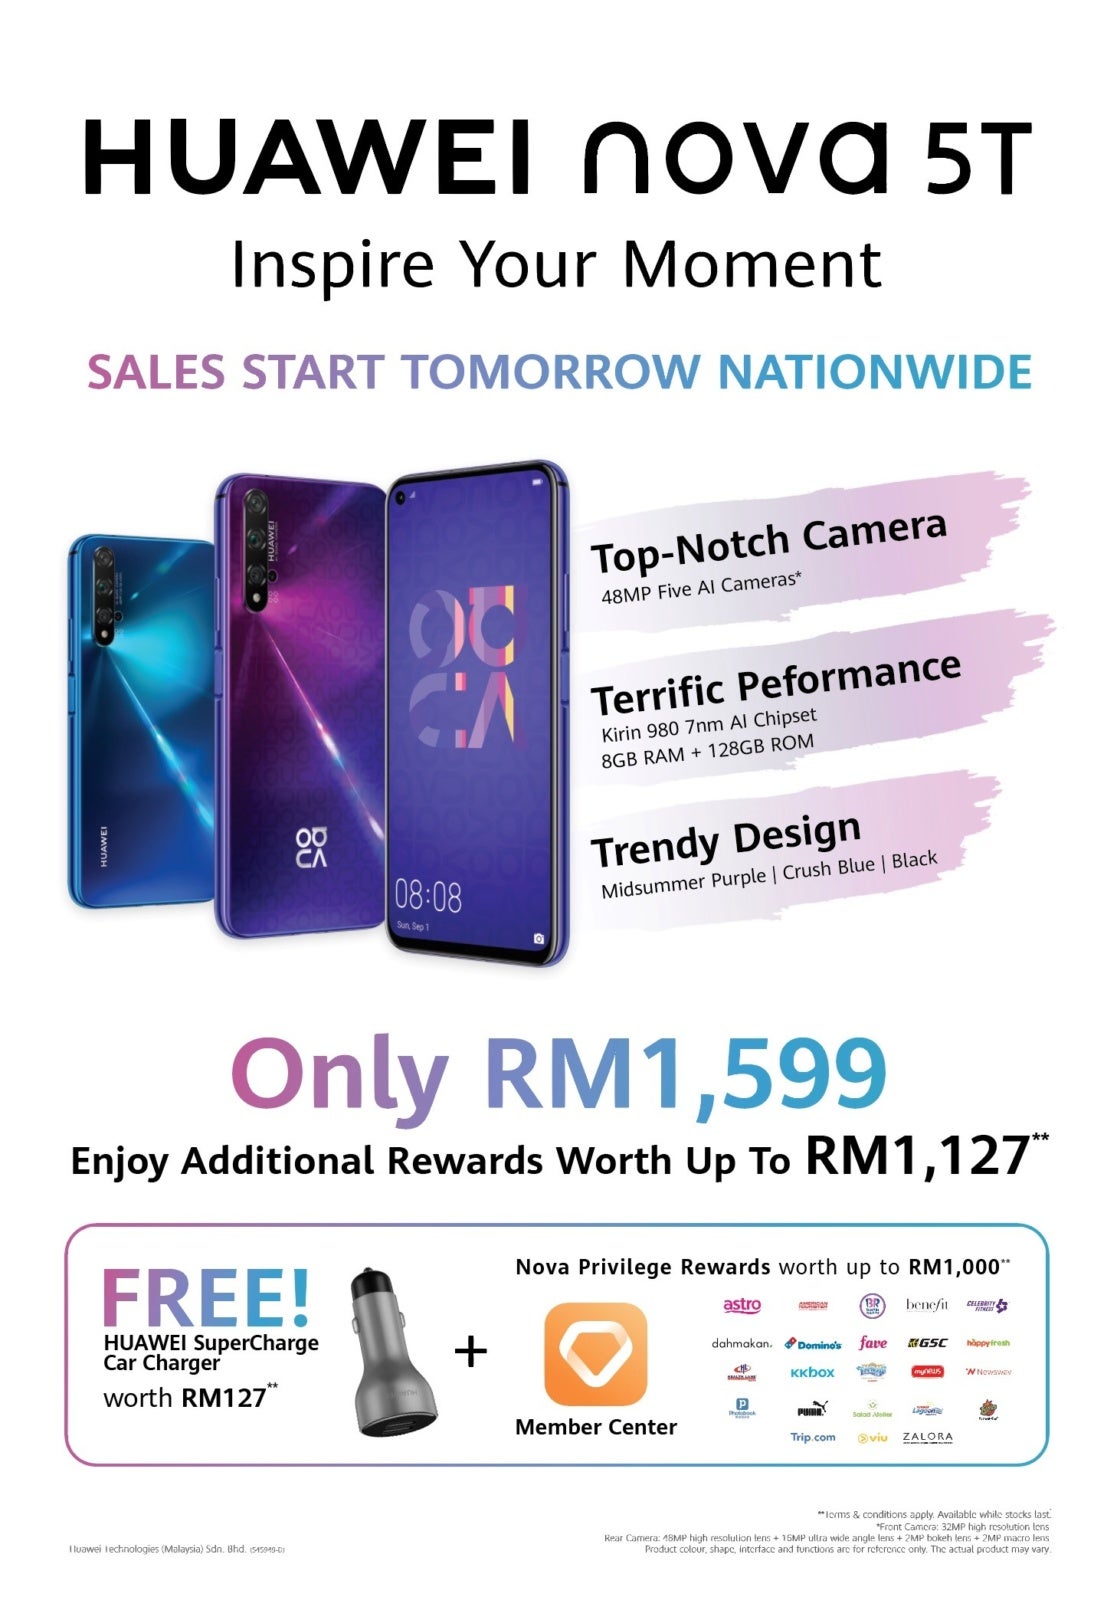 [TEST] PSA: Enjoy Rewards Worth Up to RM1,127, Exclusive Gifts & More at the Huawei nova 5T Launch Tomorrow! - WORLD OF BUZZ 6